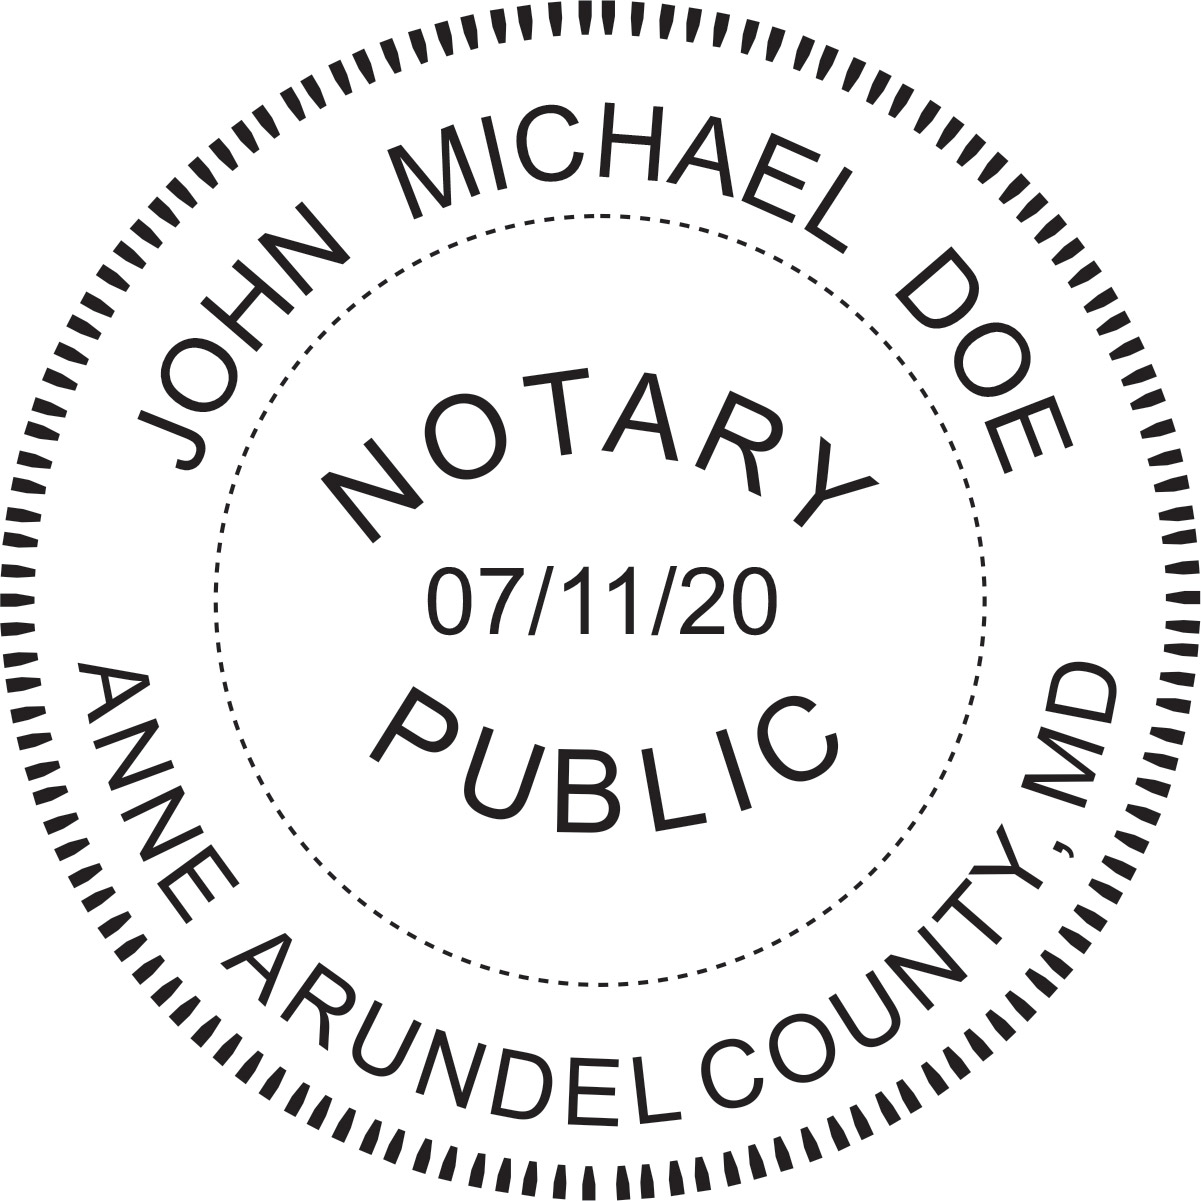 notary seal - wood stamp - maryland